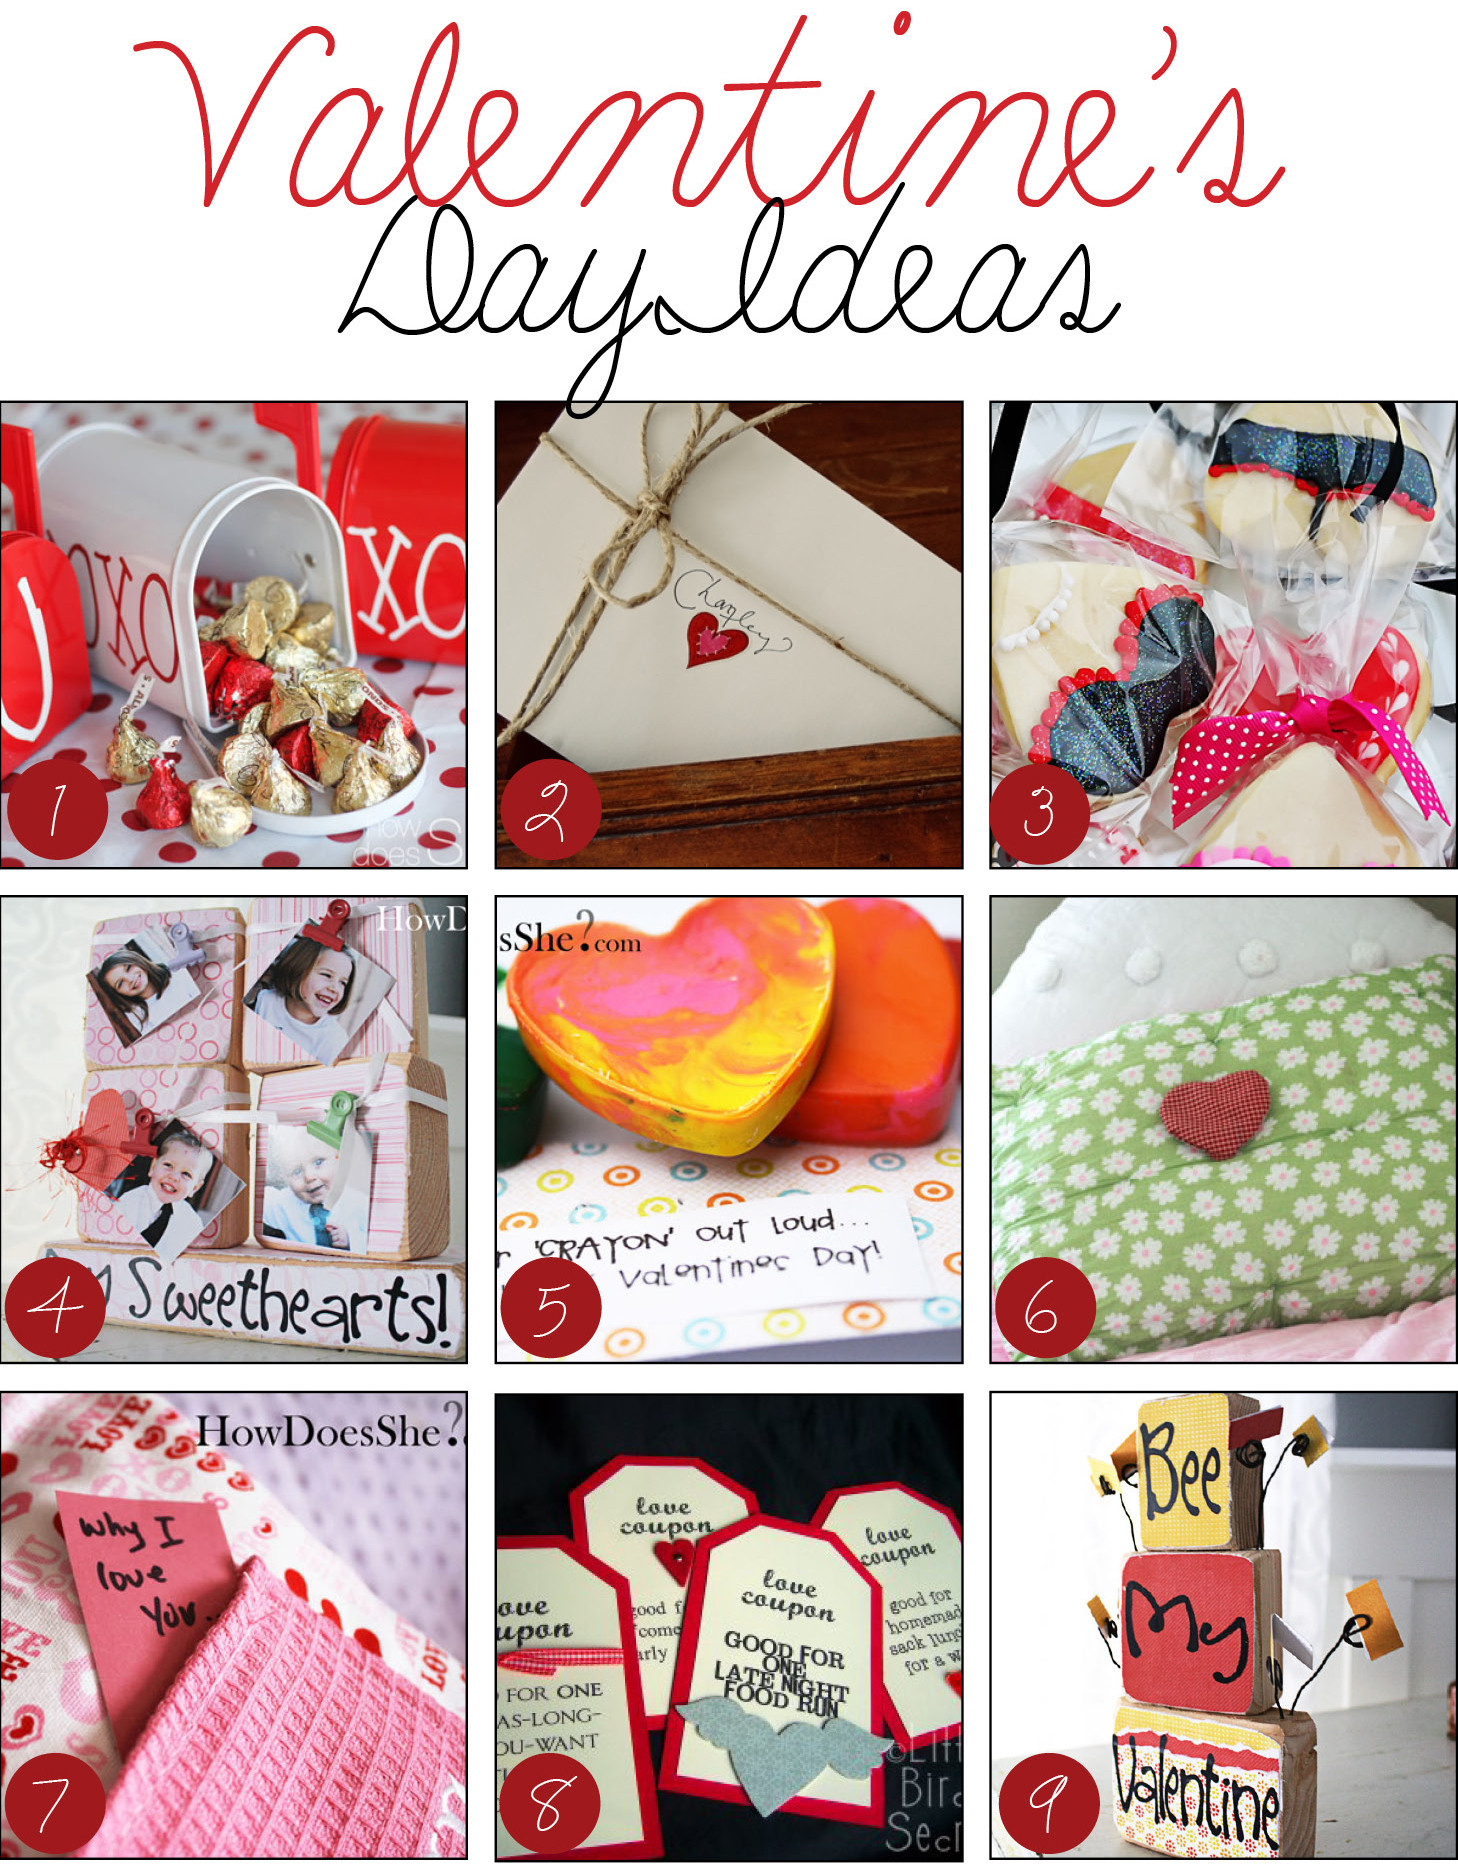 Great Ideas For Valentines Day
 Over 50 ‘LOVE’ly Valentine’s Day Ideas Dollar Store Crafts